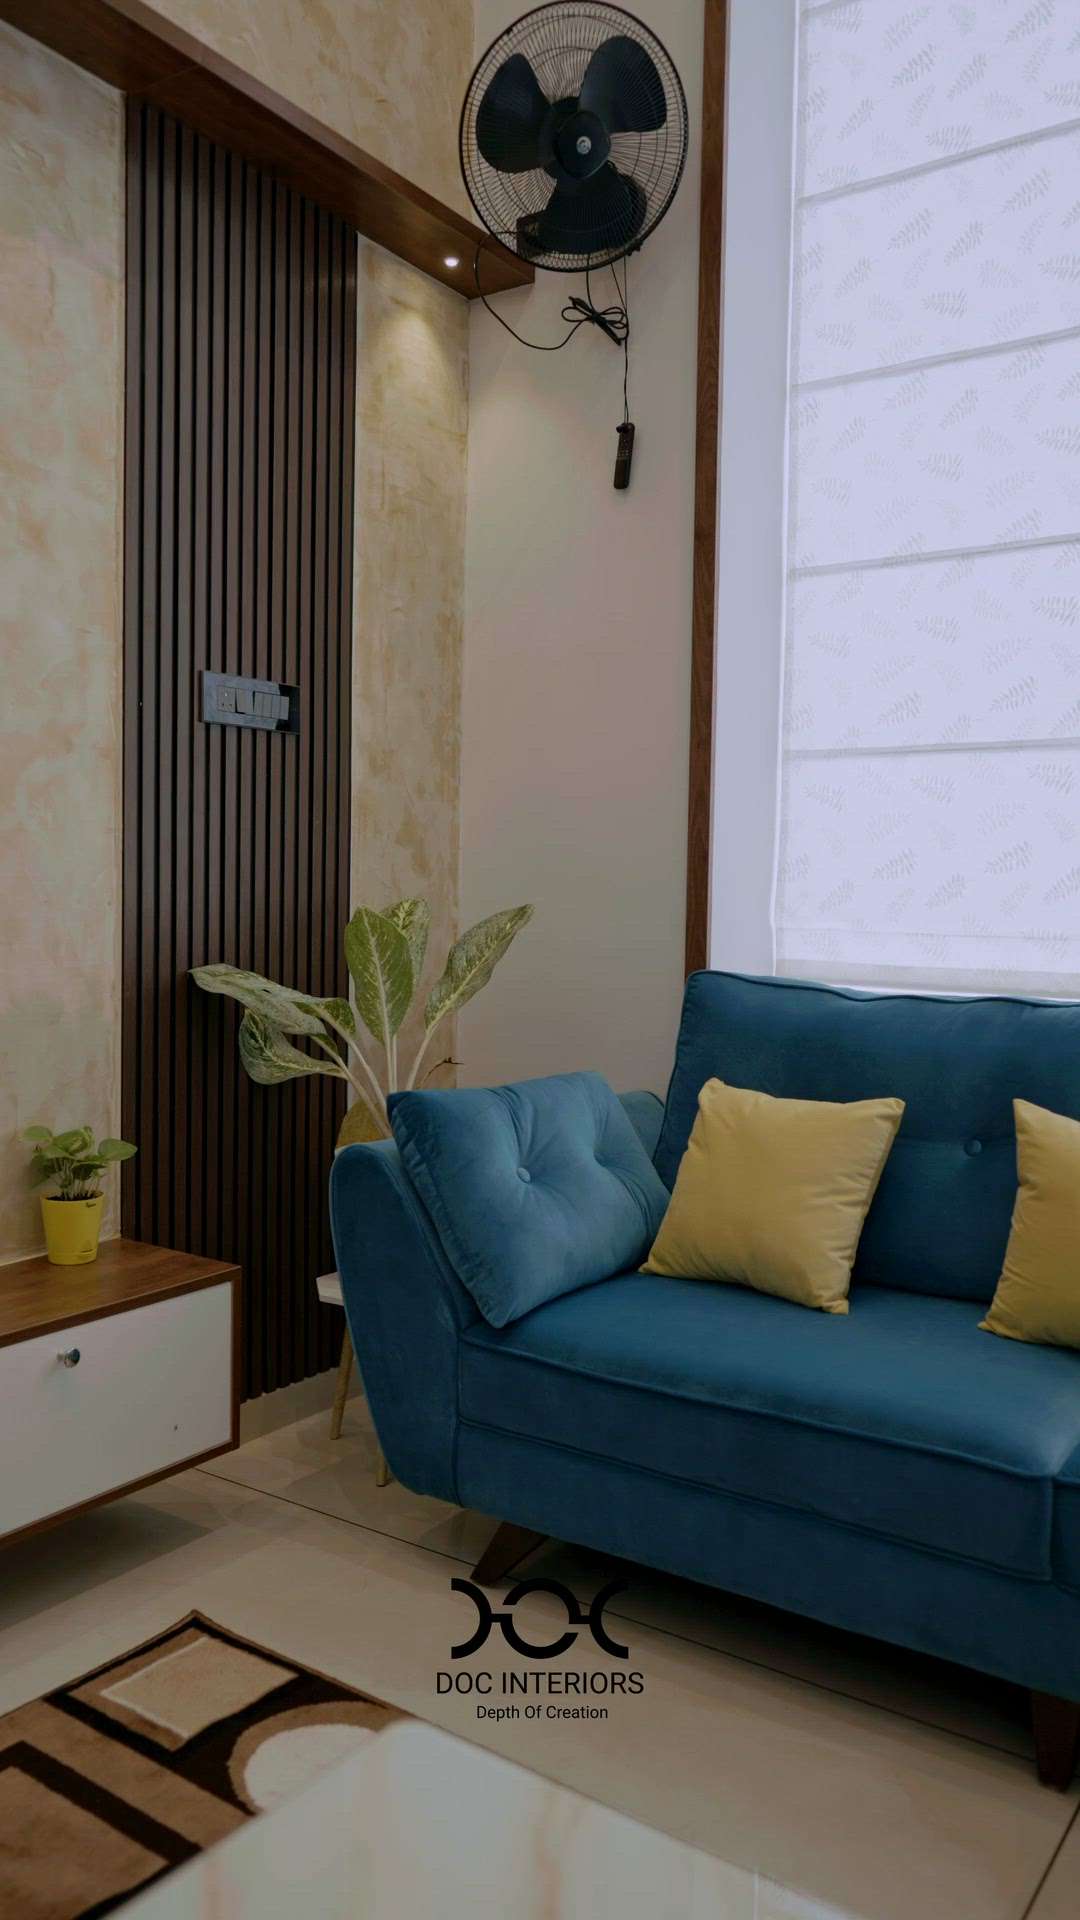 Doc interiors kochi and Kodungallur, just enjoy our finished interior design work video and like it, thank you #interiors
 #docinteriors  #keralastyle  #koloapp  #Daily